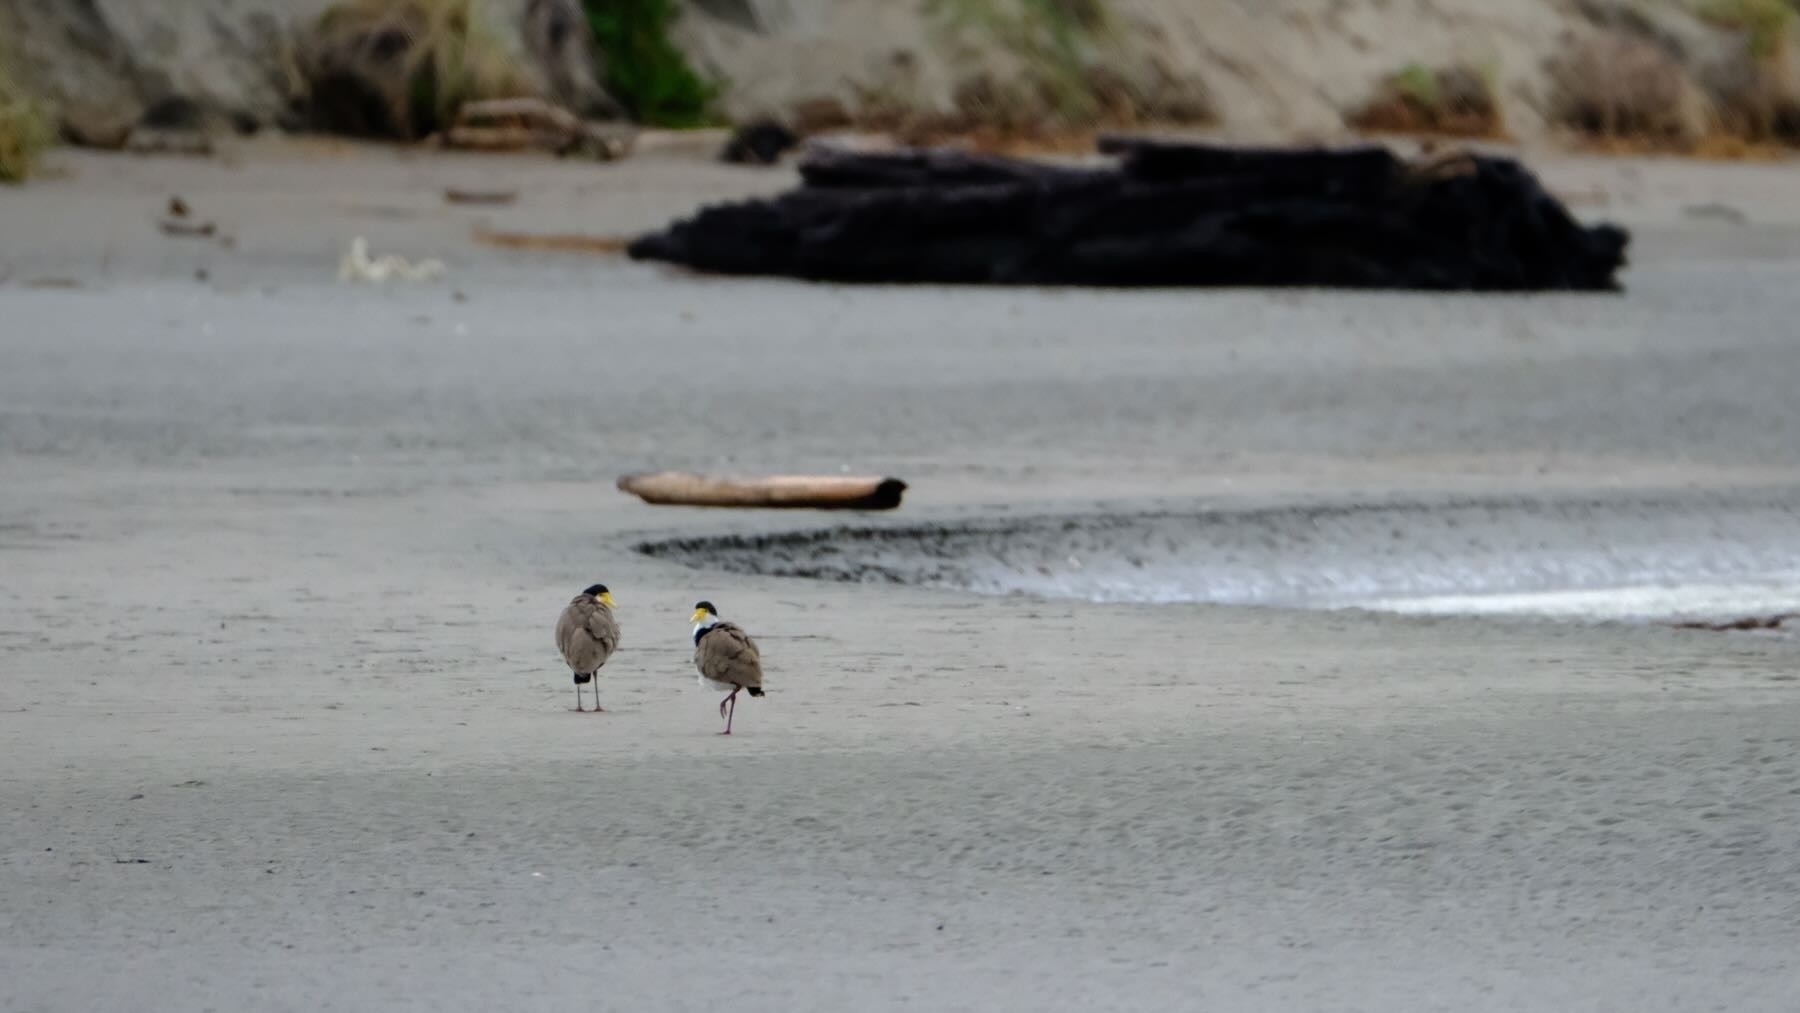 Two Spur winged plovers on sand, looking ruffled.